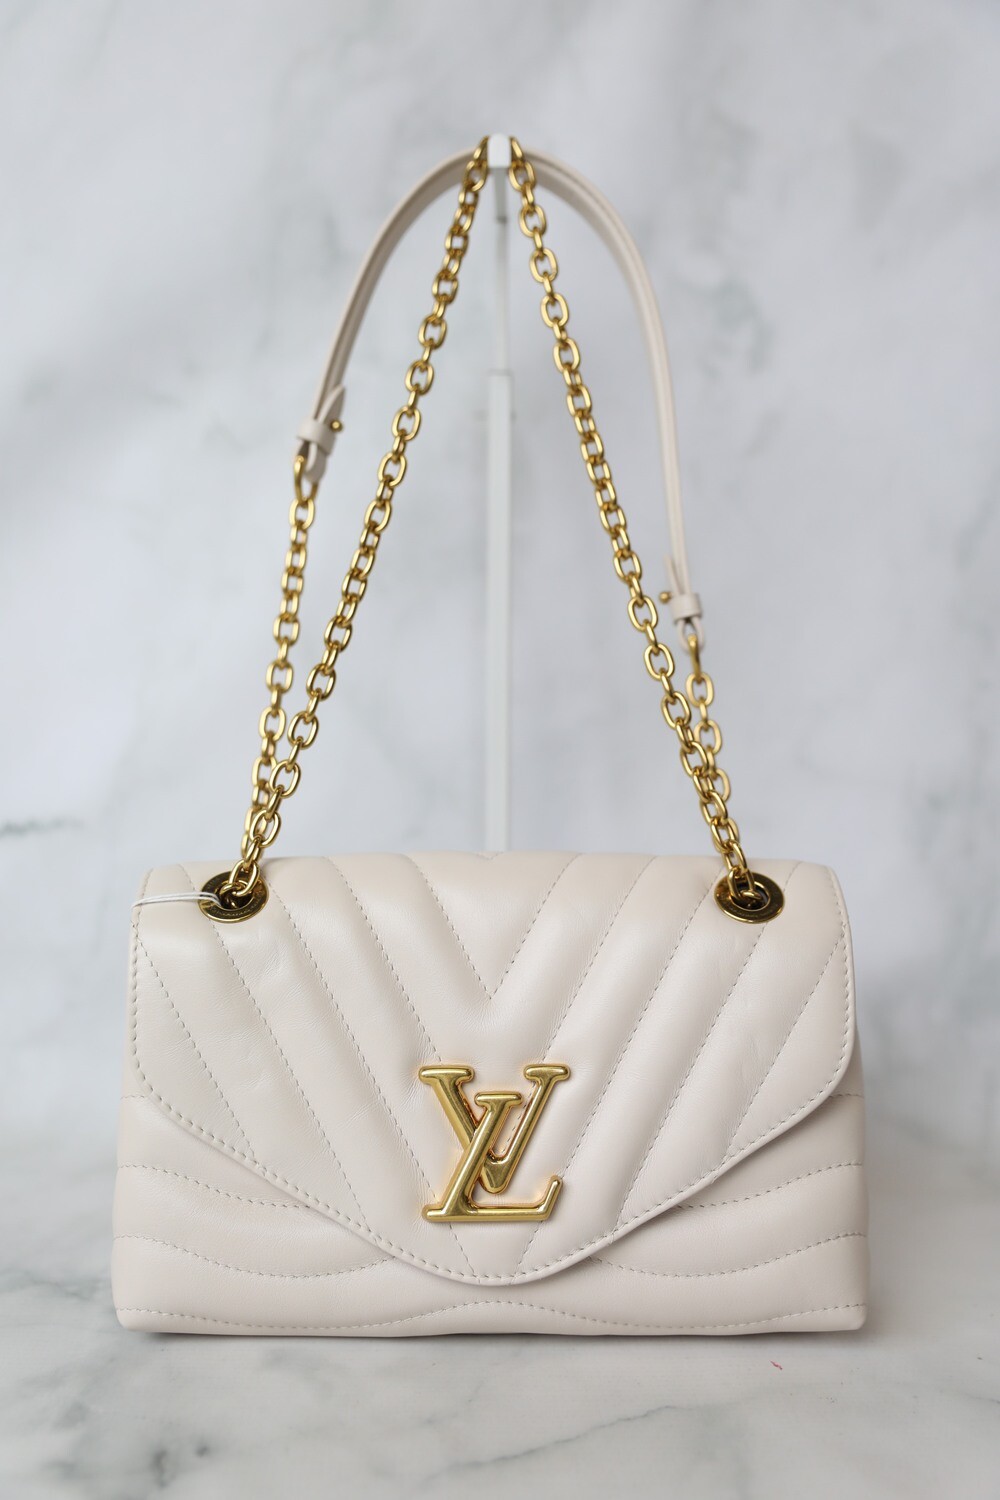 Louis Vuitton New Wave Flap, White with Gold Hardware, Preowned in